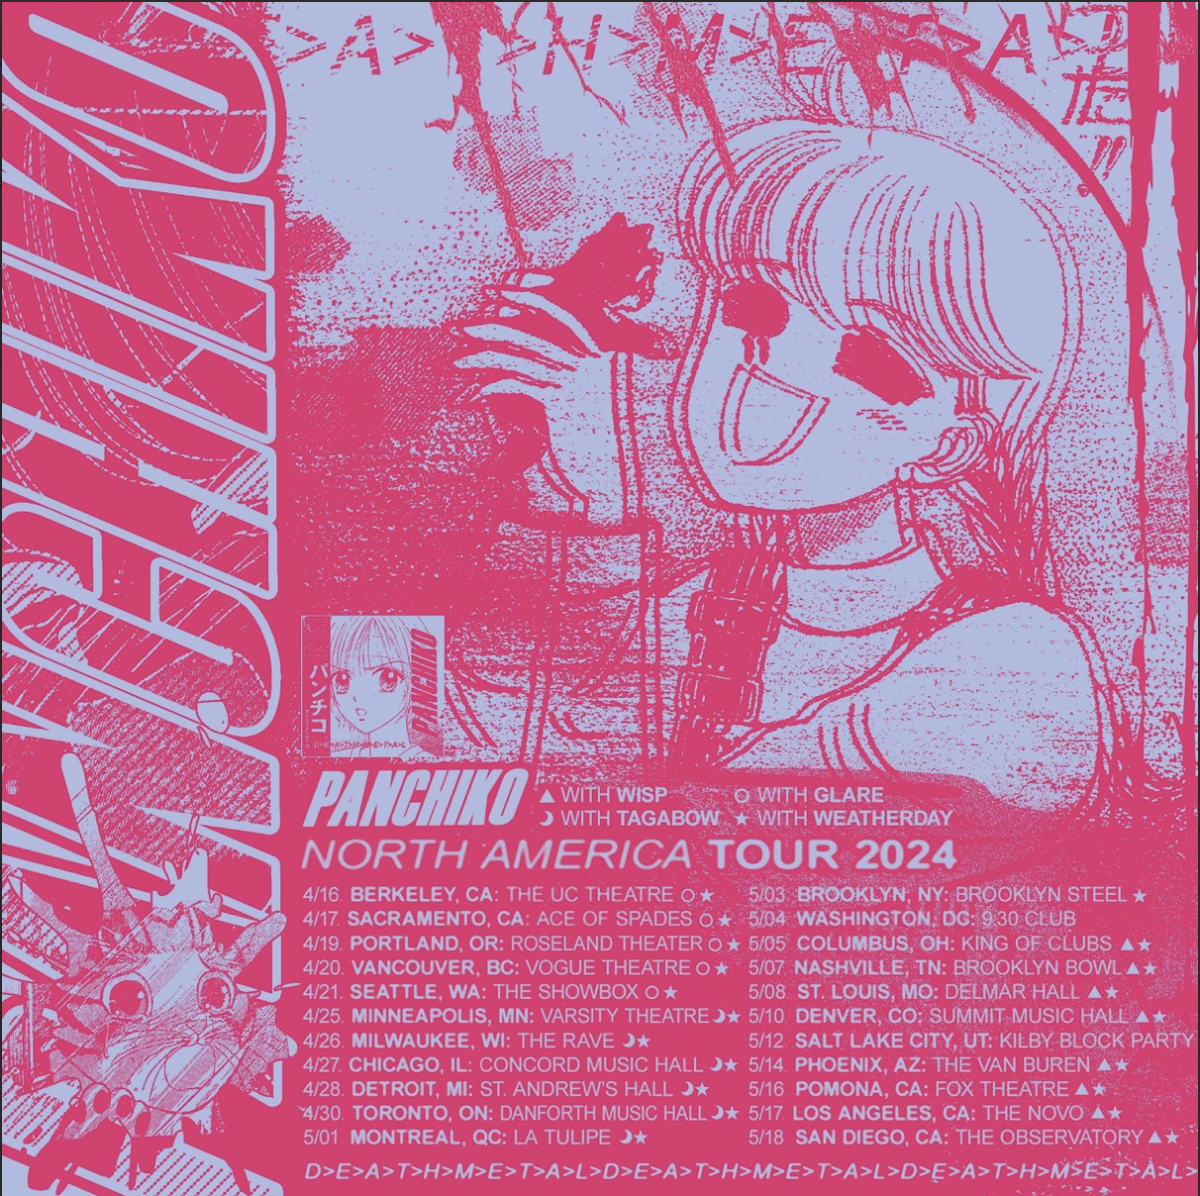 Panchiko+is+coming+to+Milwaukee+in+April.+